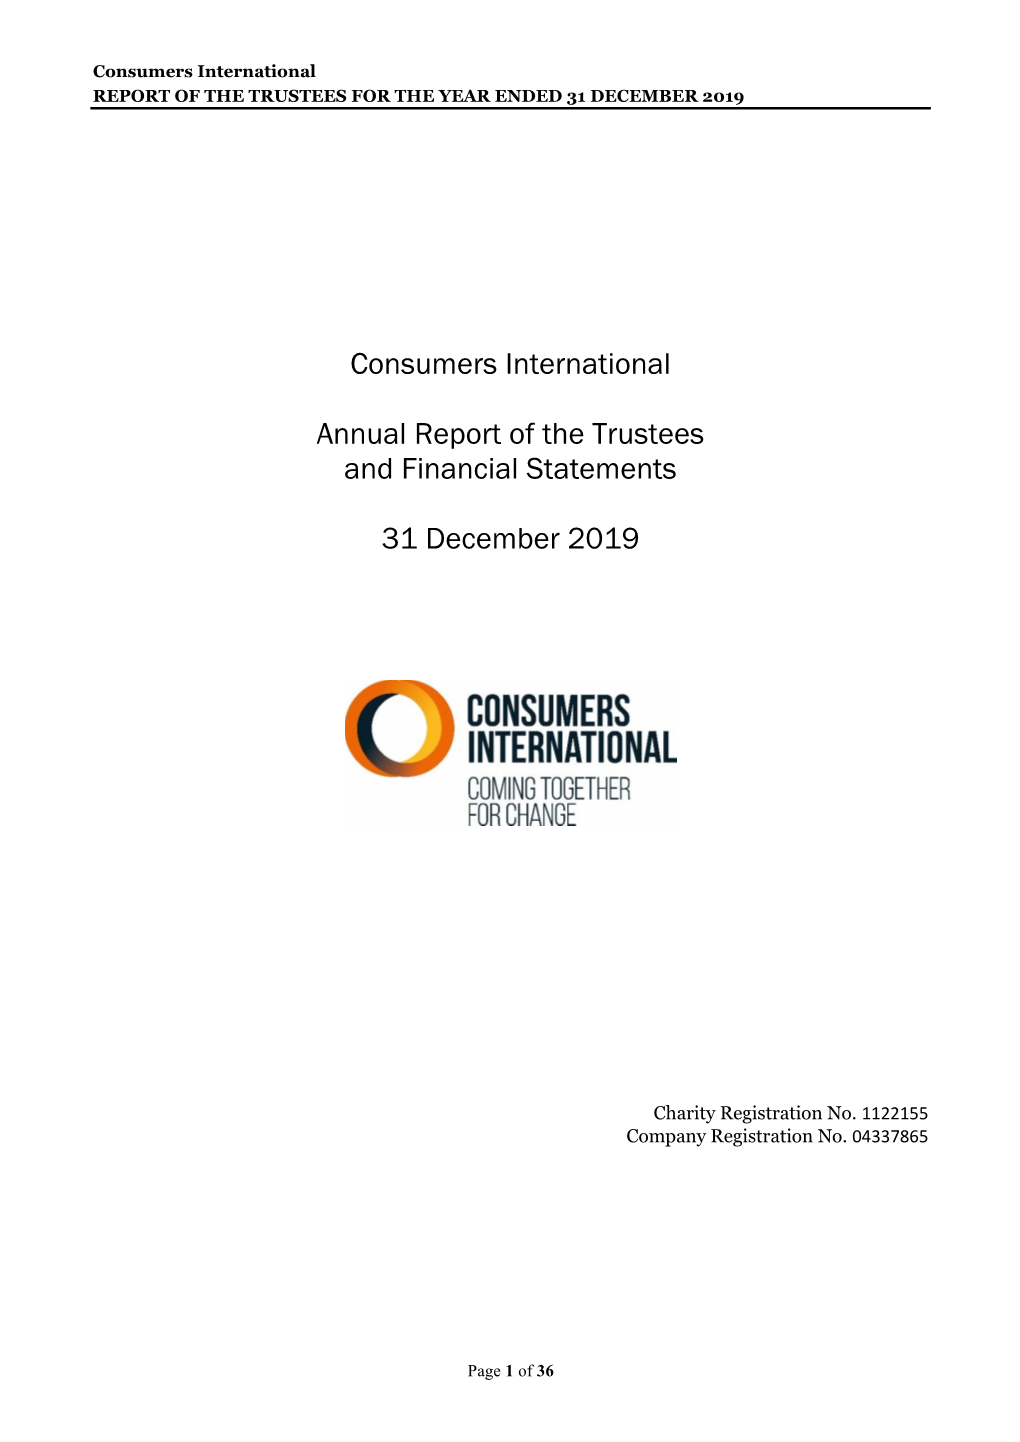 Consumers International Annual Report of the Trustees and Financial Statements 31 December 2019